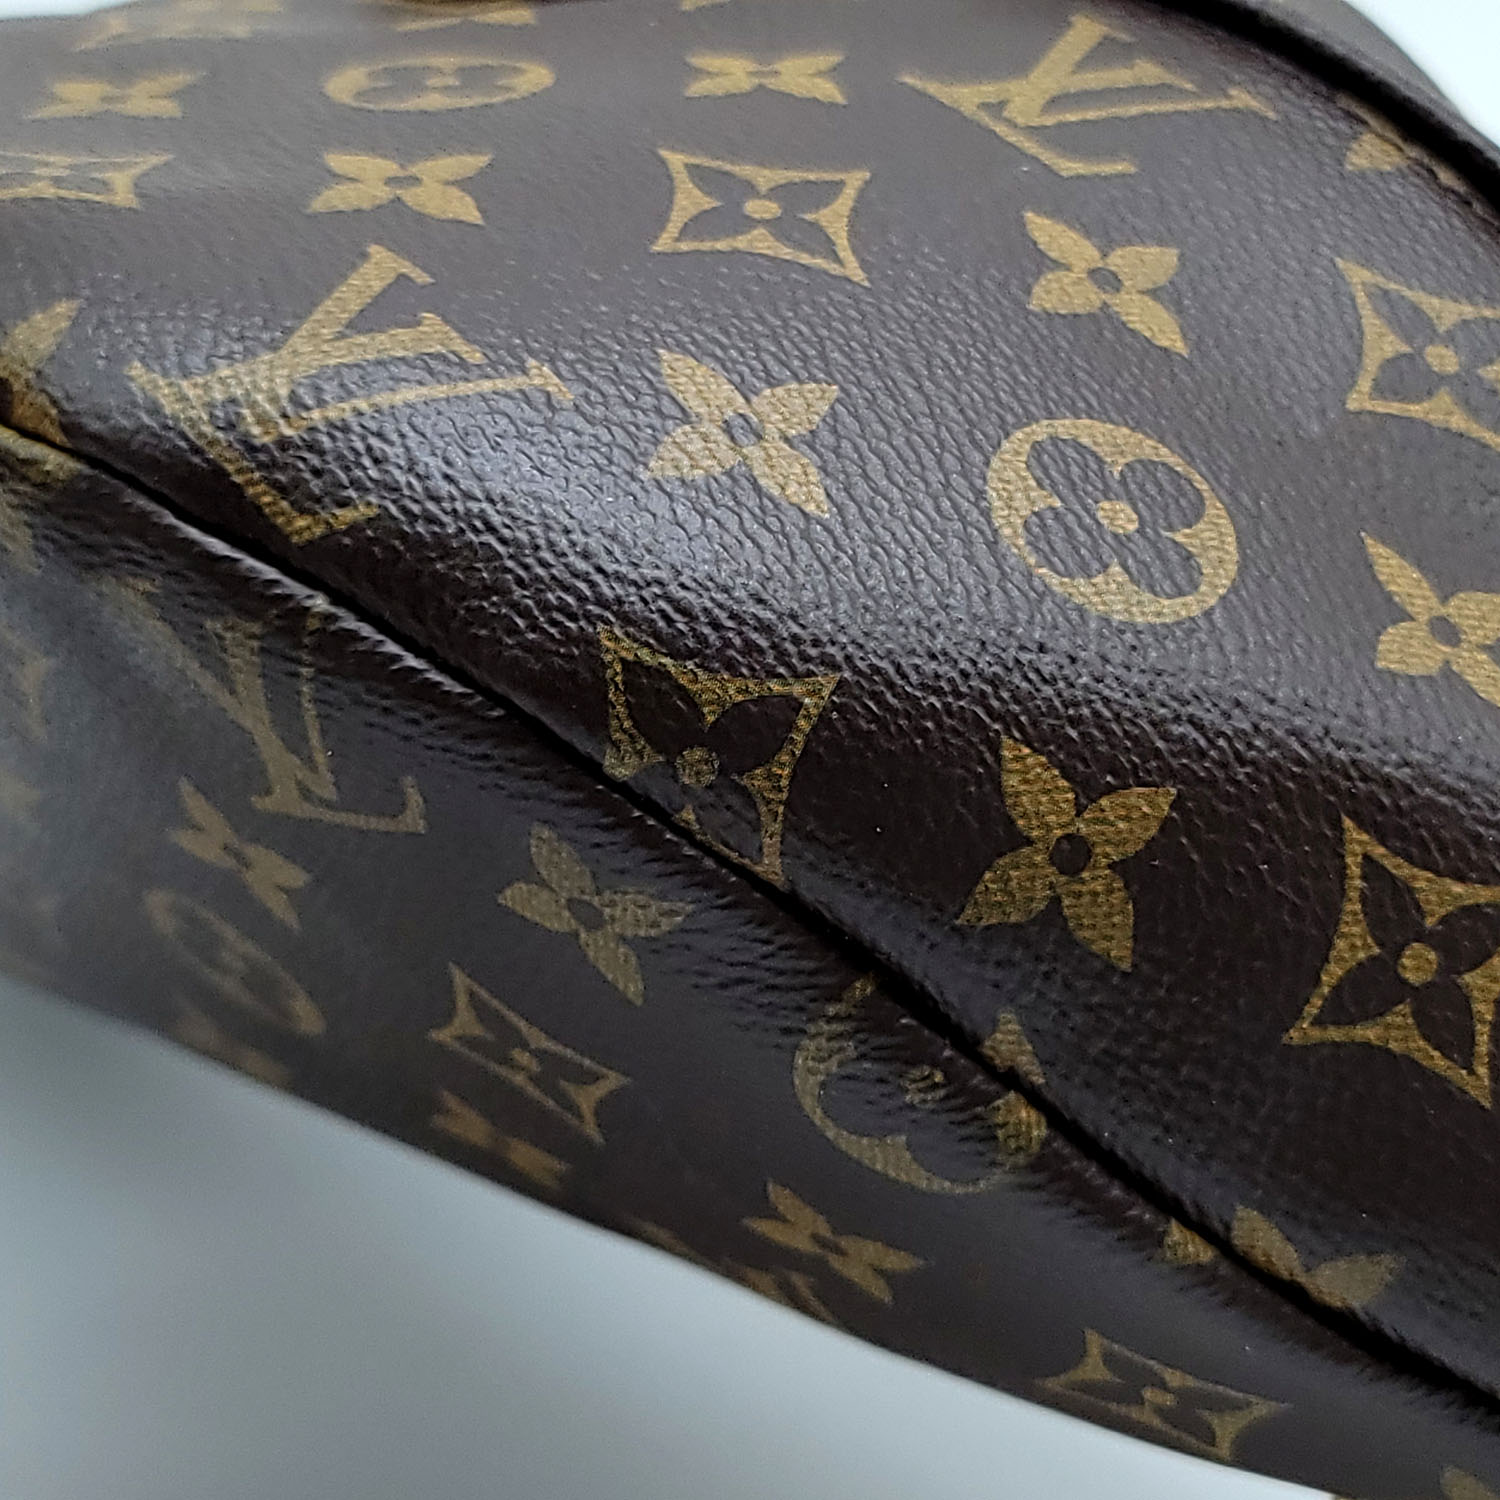 Initial thoughts on the Louis Vuitton High Rise Bumbag🤔 #louisvuitton, Louis Vuitton Bag Review